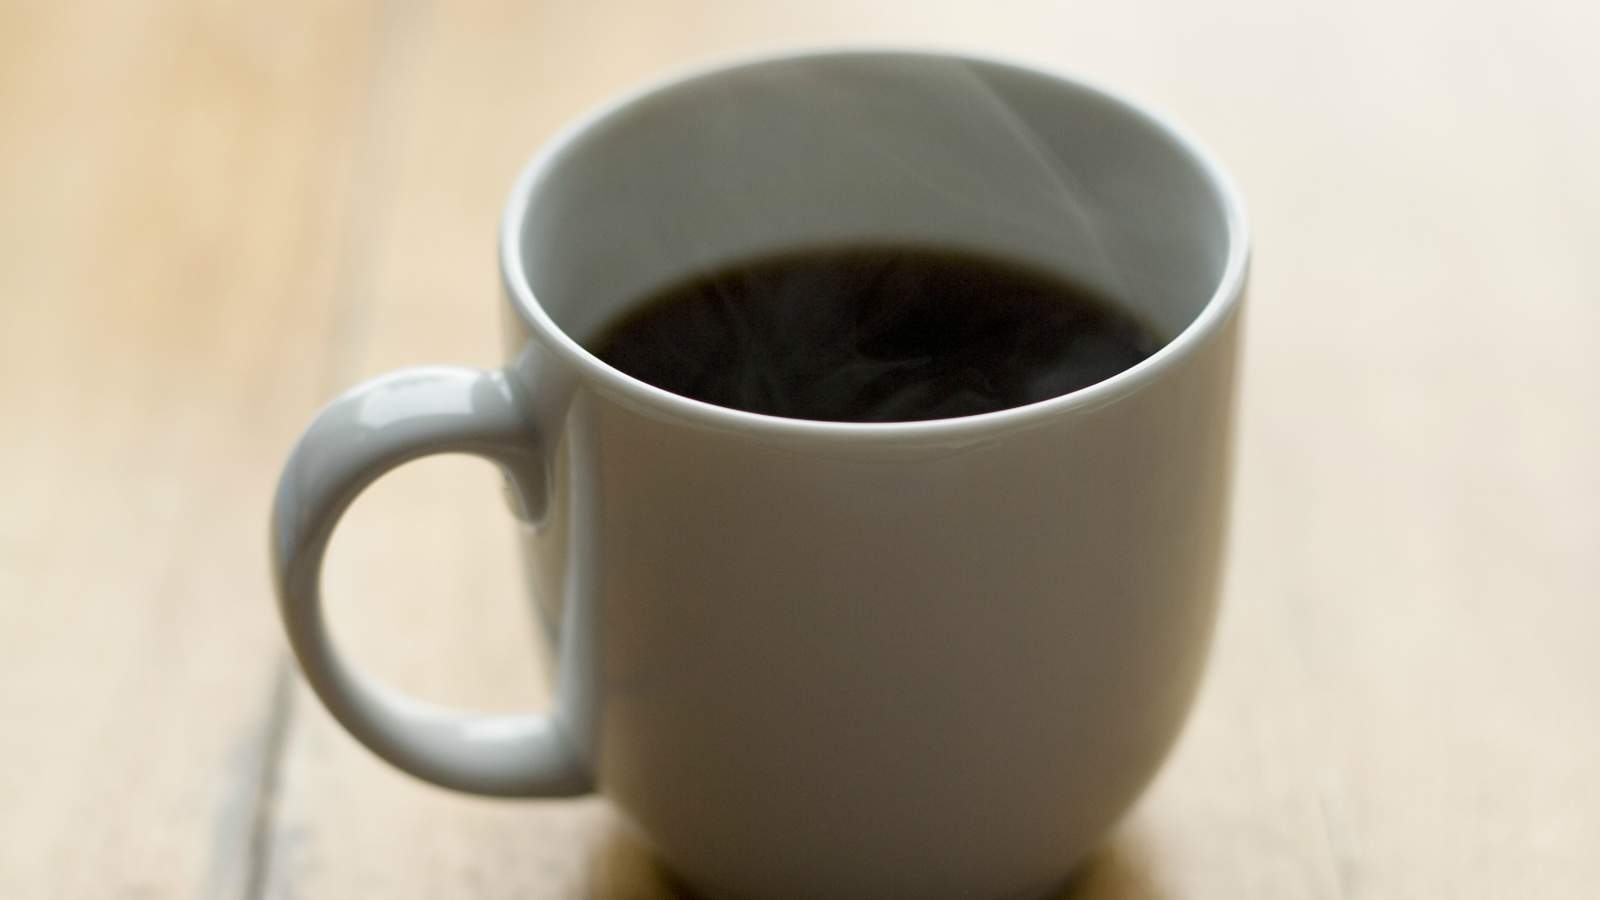 That cup of coffee might slow the spread of colon cancer